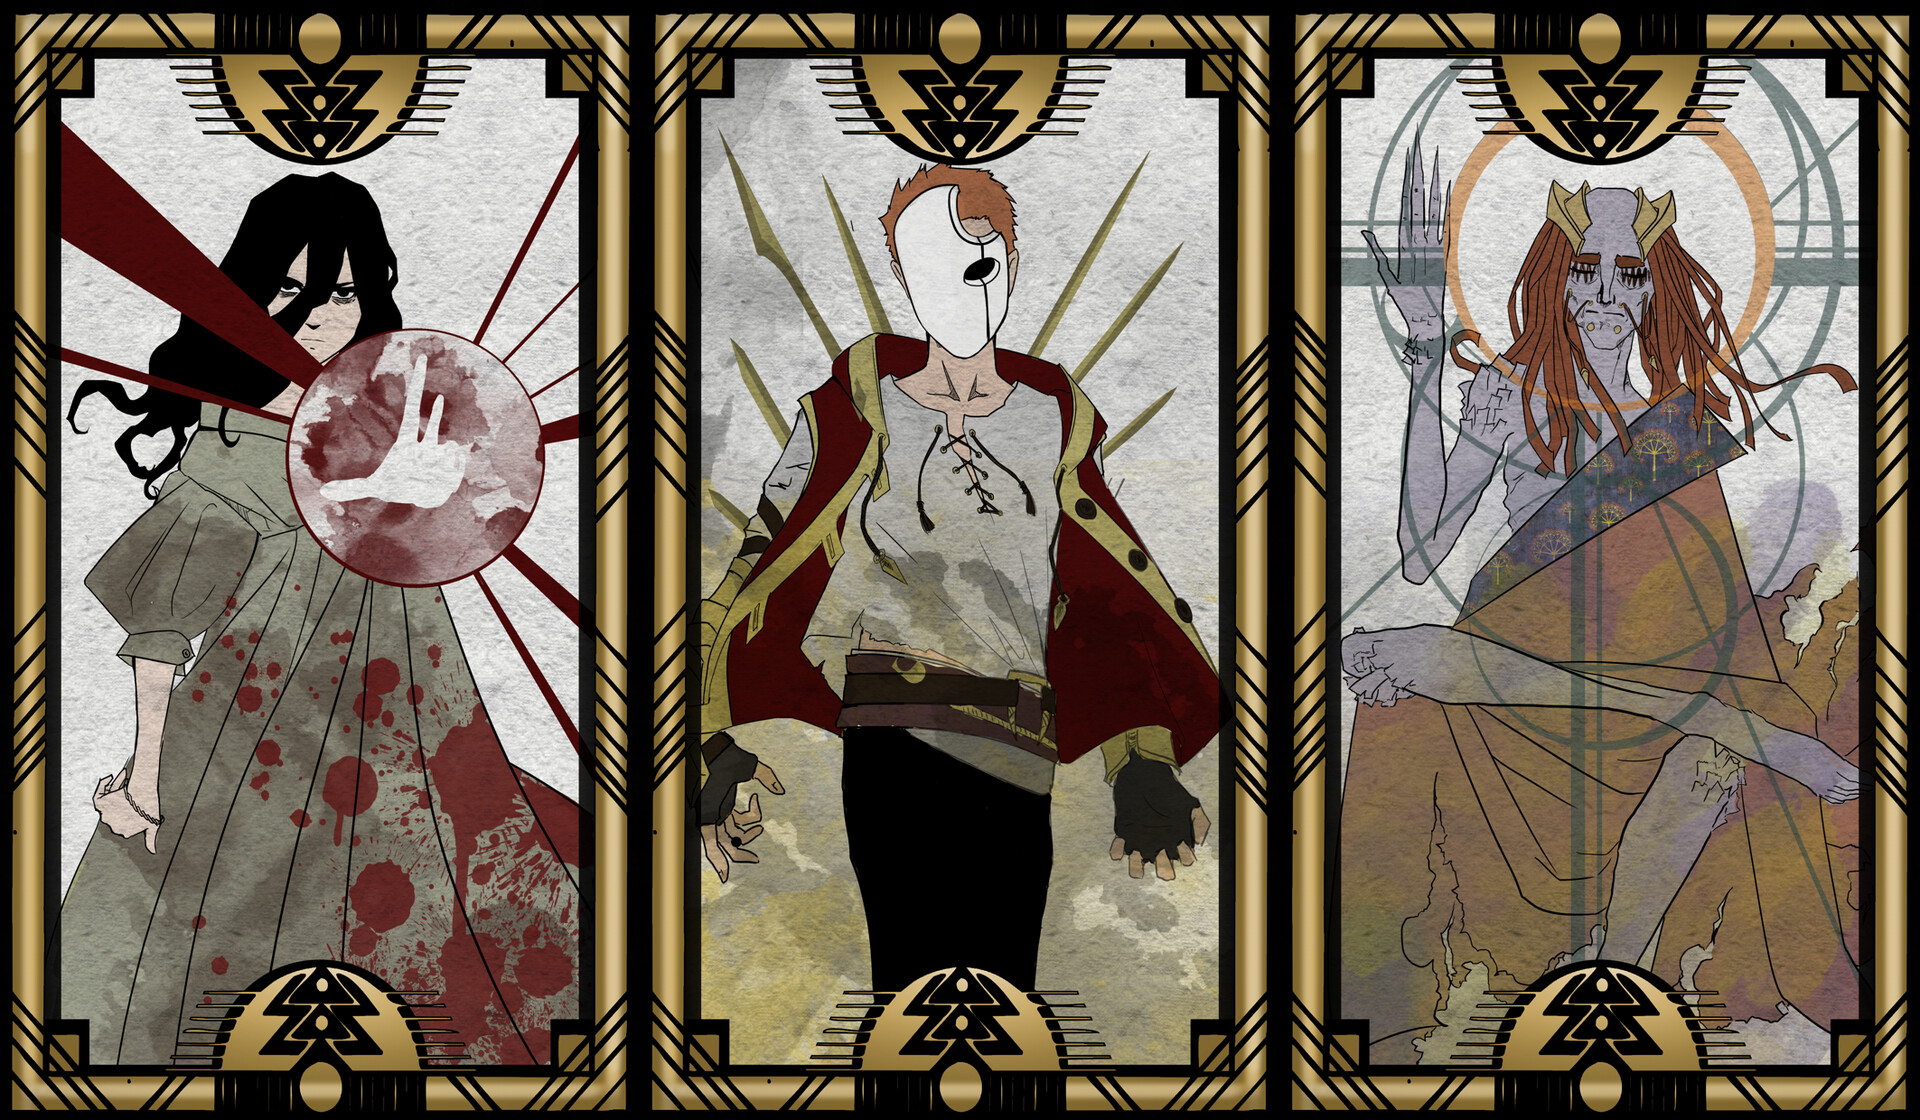 Character cards for my book "Grimoire"